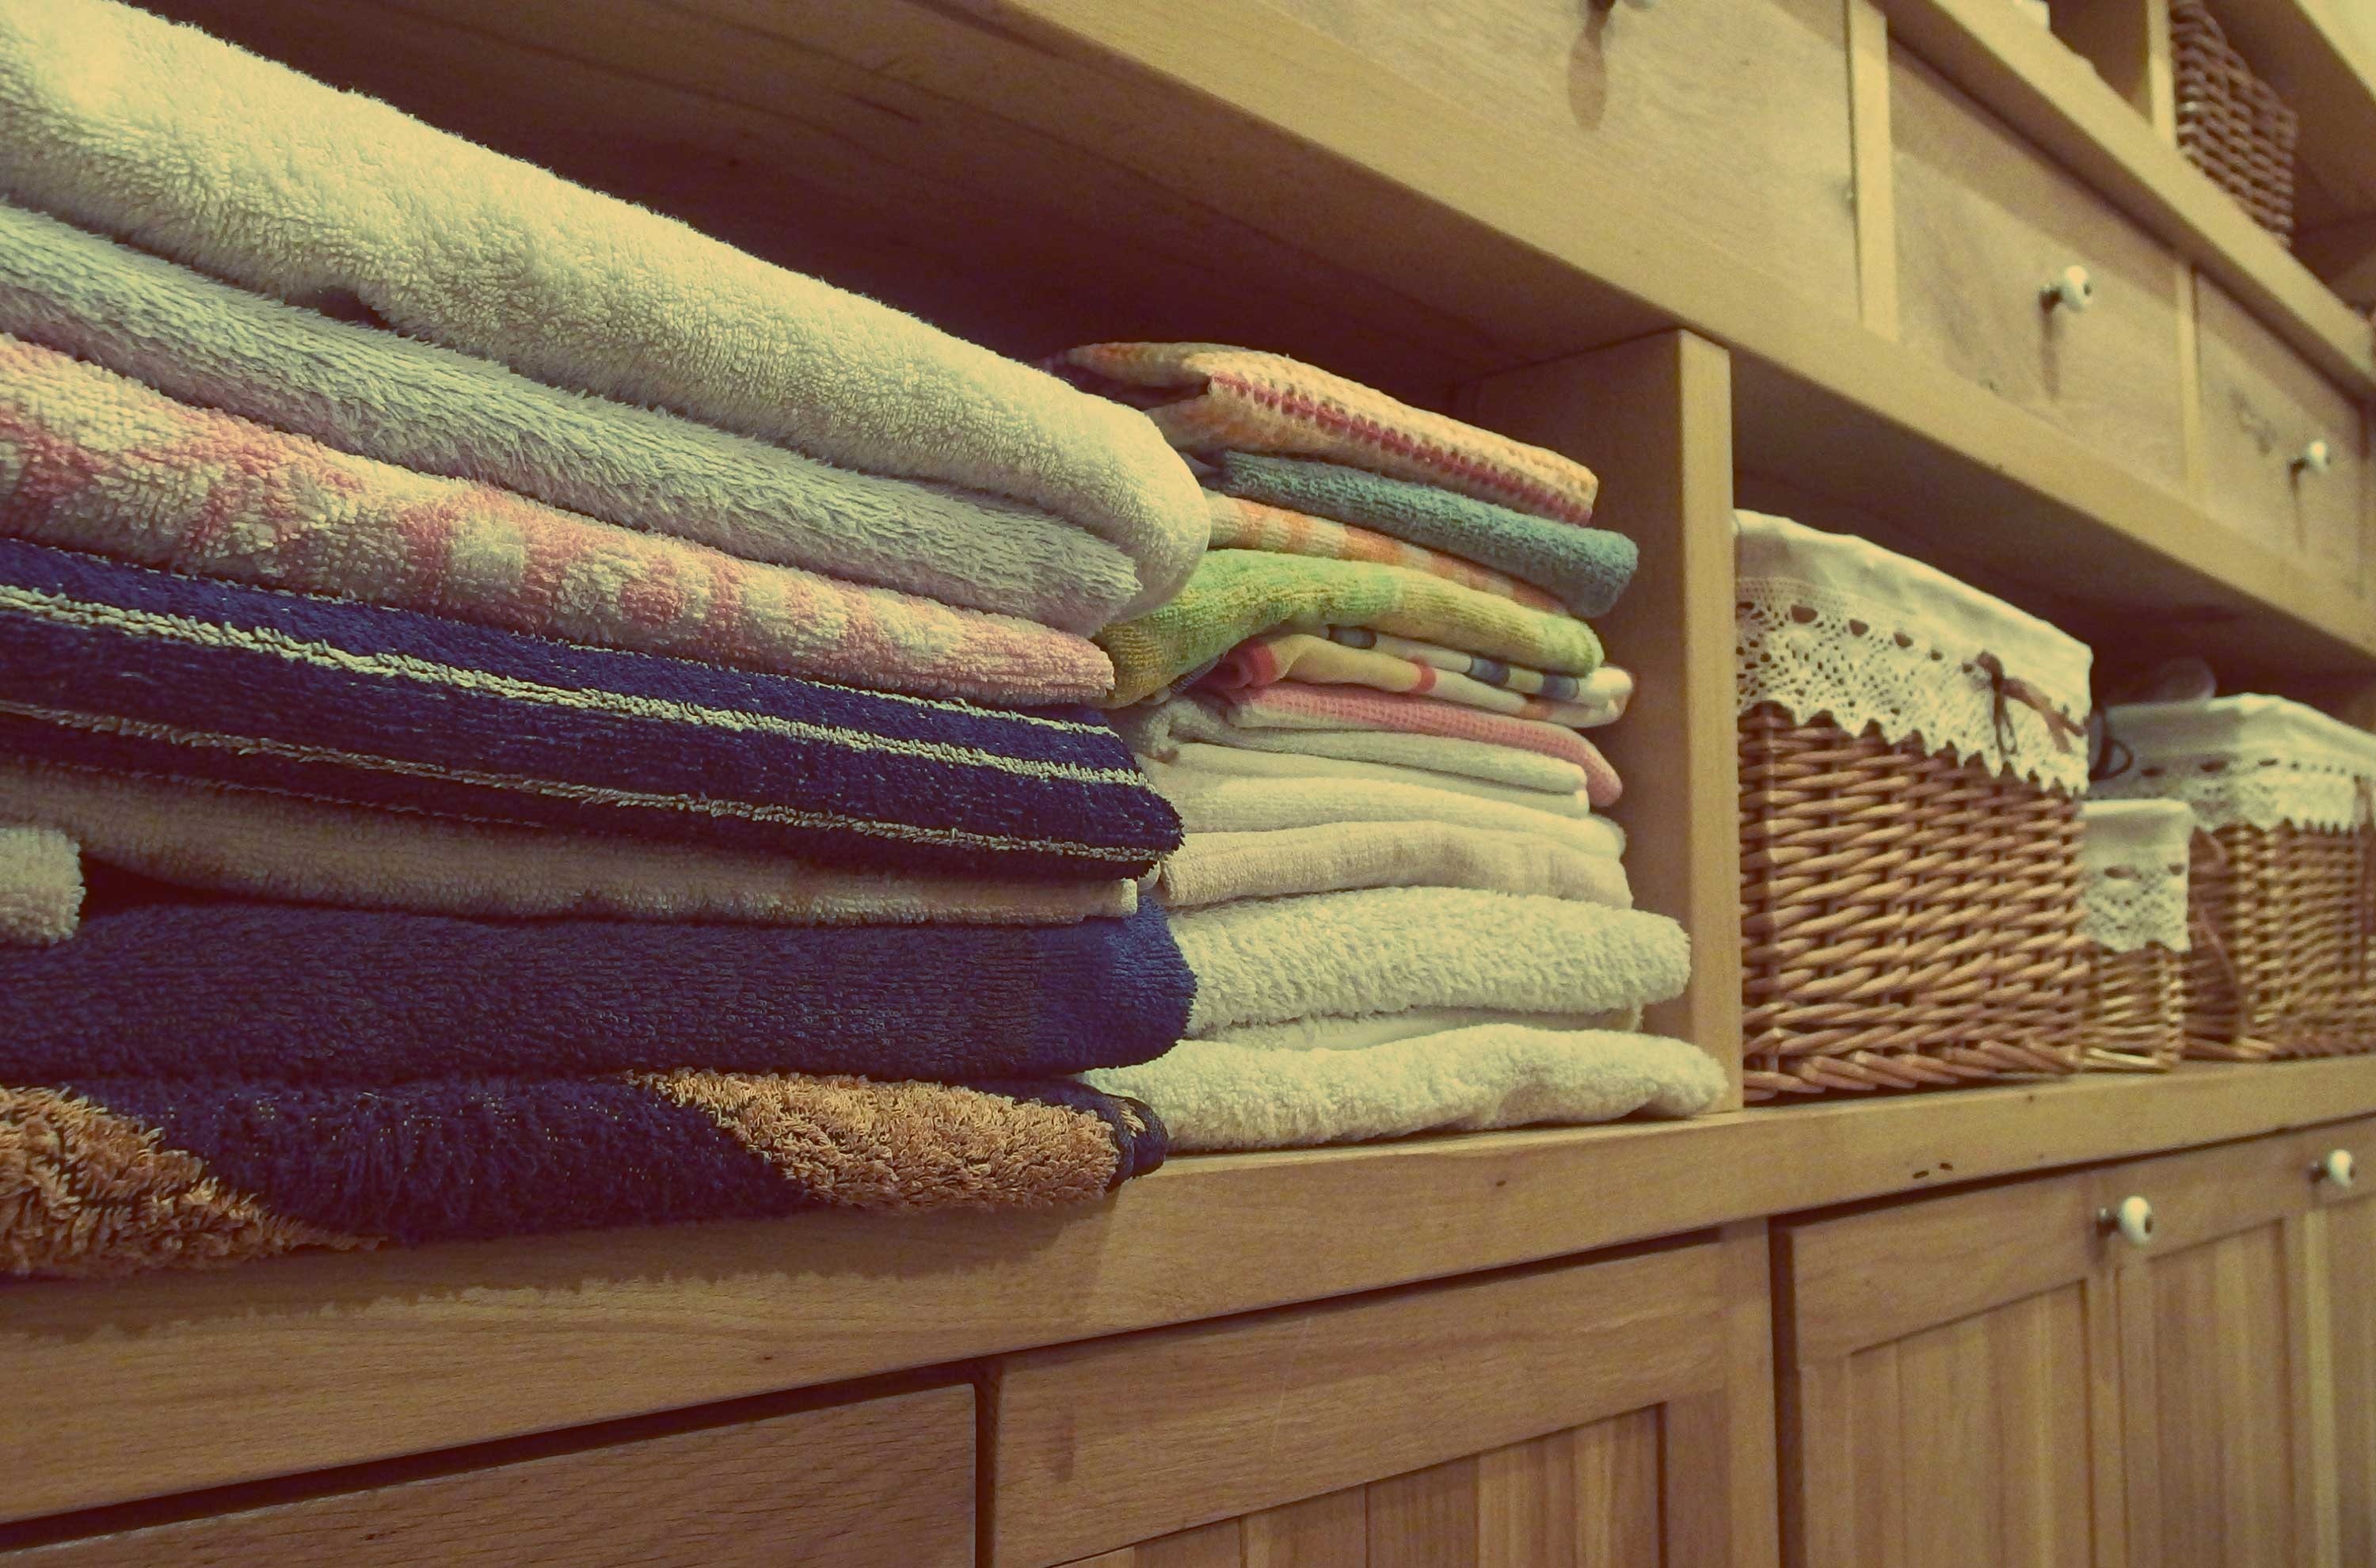 An organised linen cupboard is a little DIY that will make life much easier when the guests arrive.